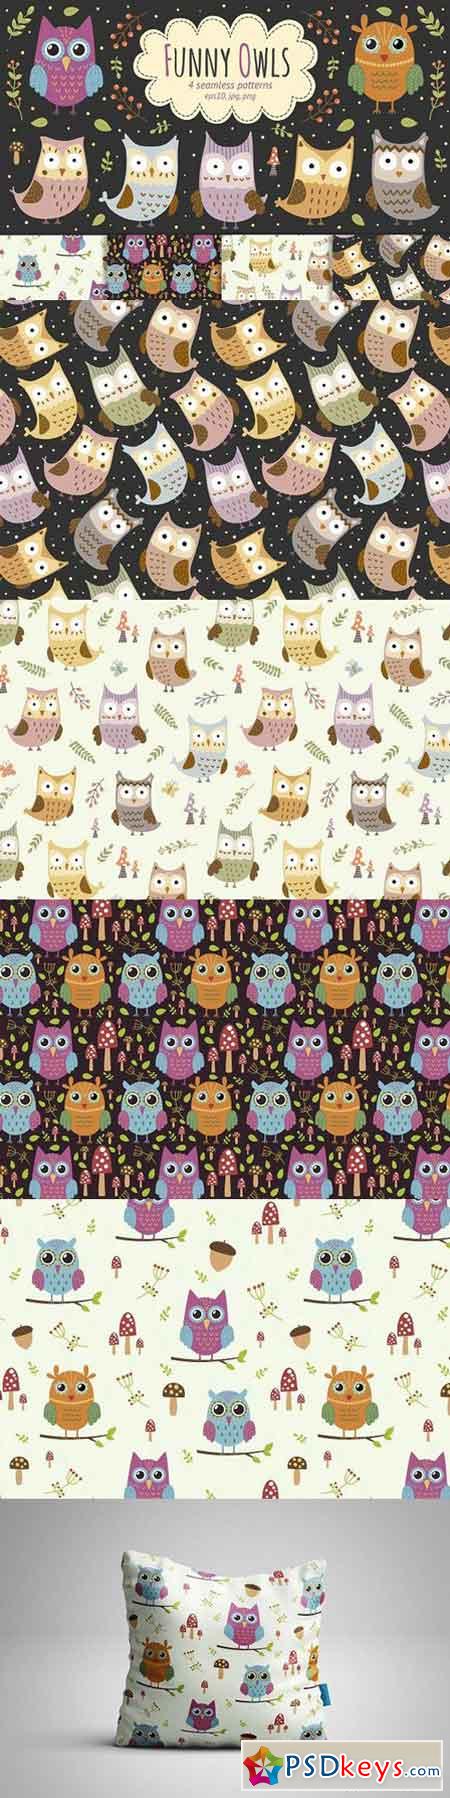 Funny Owls 4 seamless patterns 924232